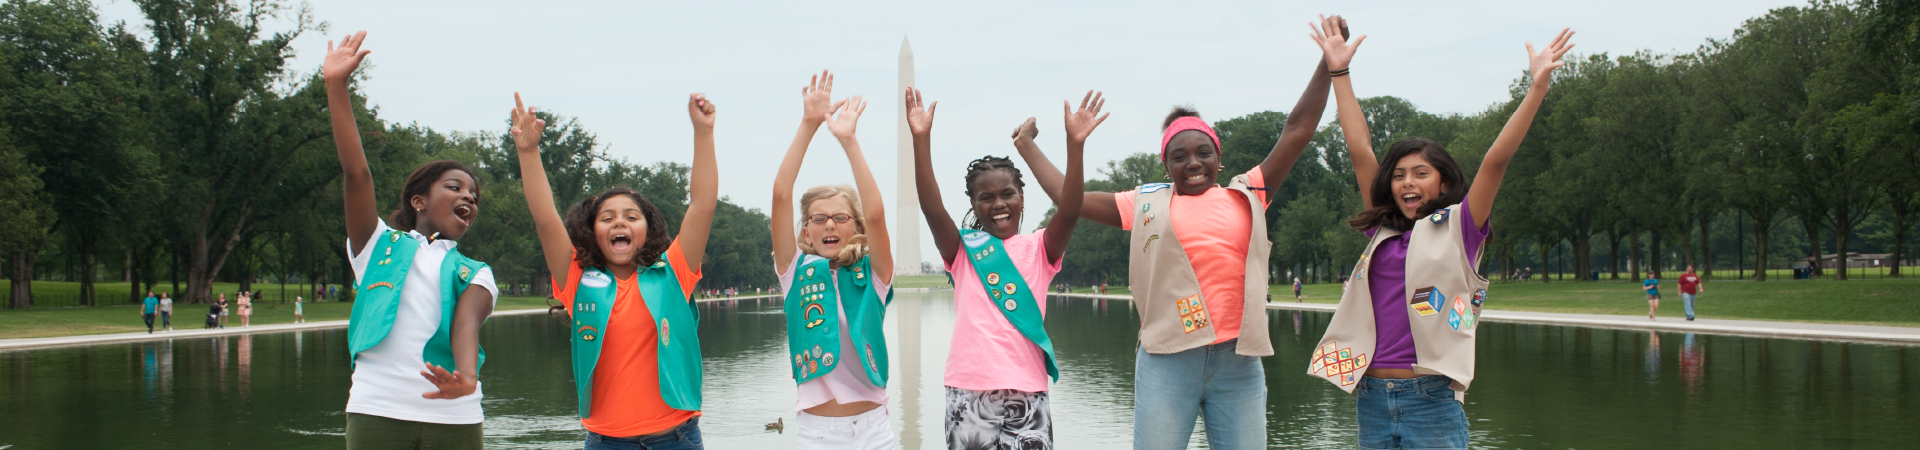  Six Girl Scouts wearing Girl Scout vests stand in a row with their arms raised overhead. Behind them is the Lincoln Memorial Reflecting Pool and Washington Monument and the background. 